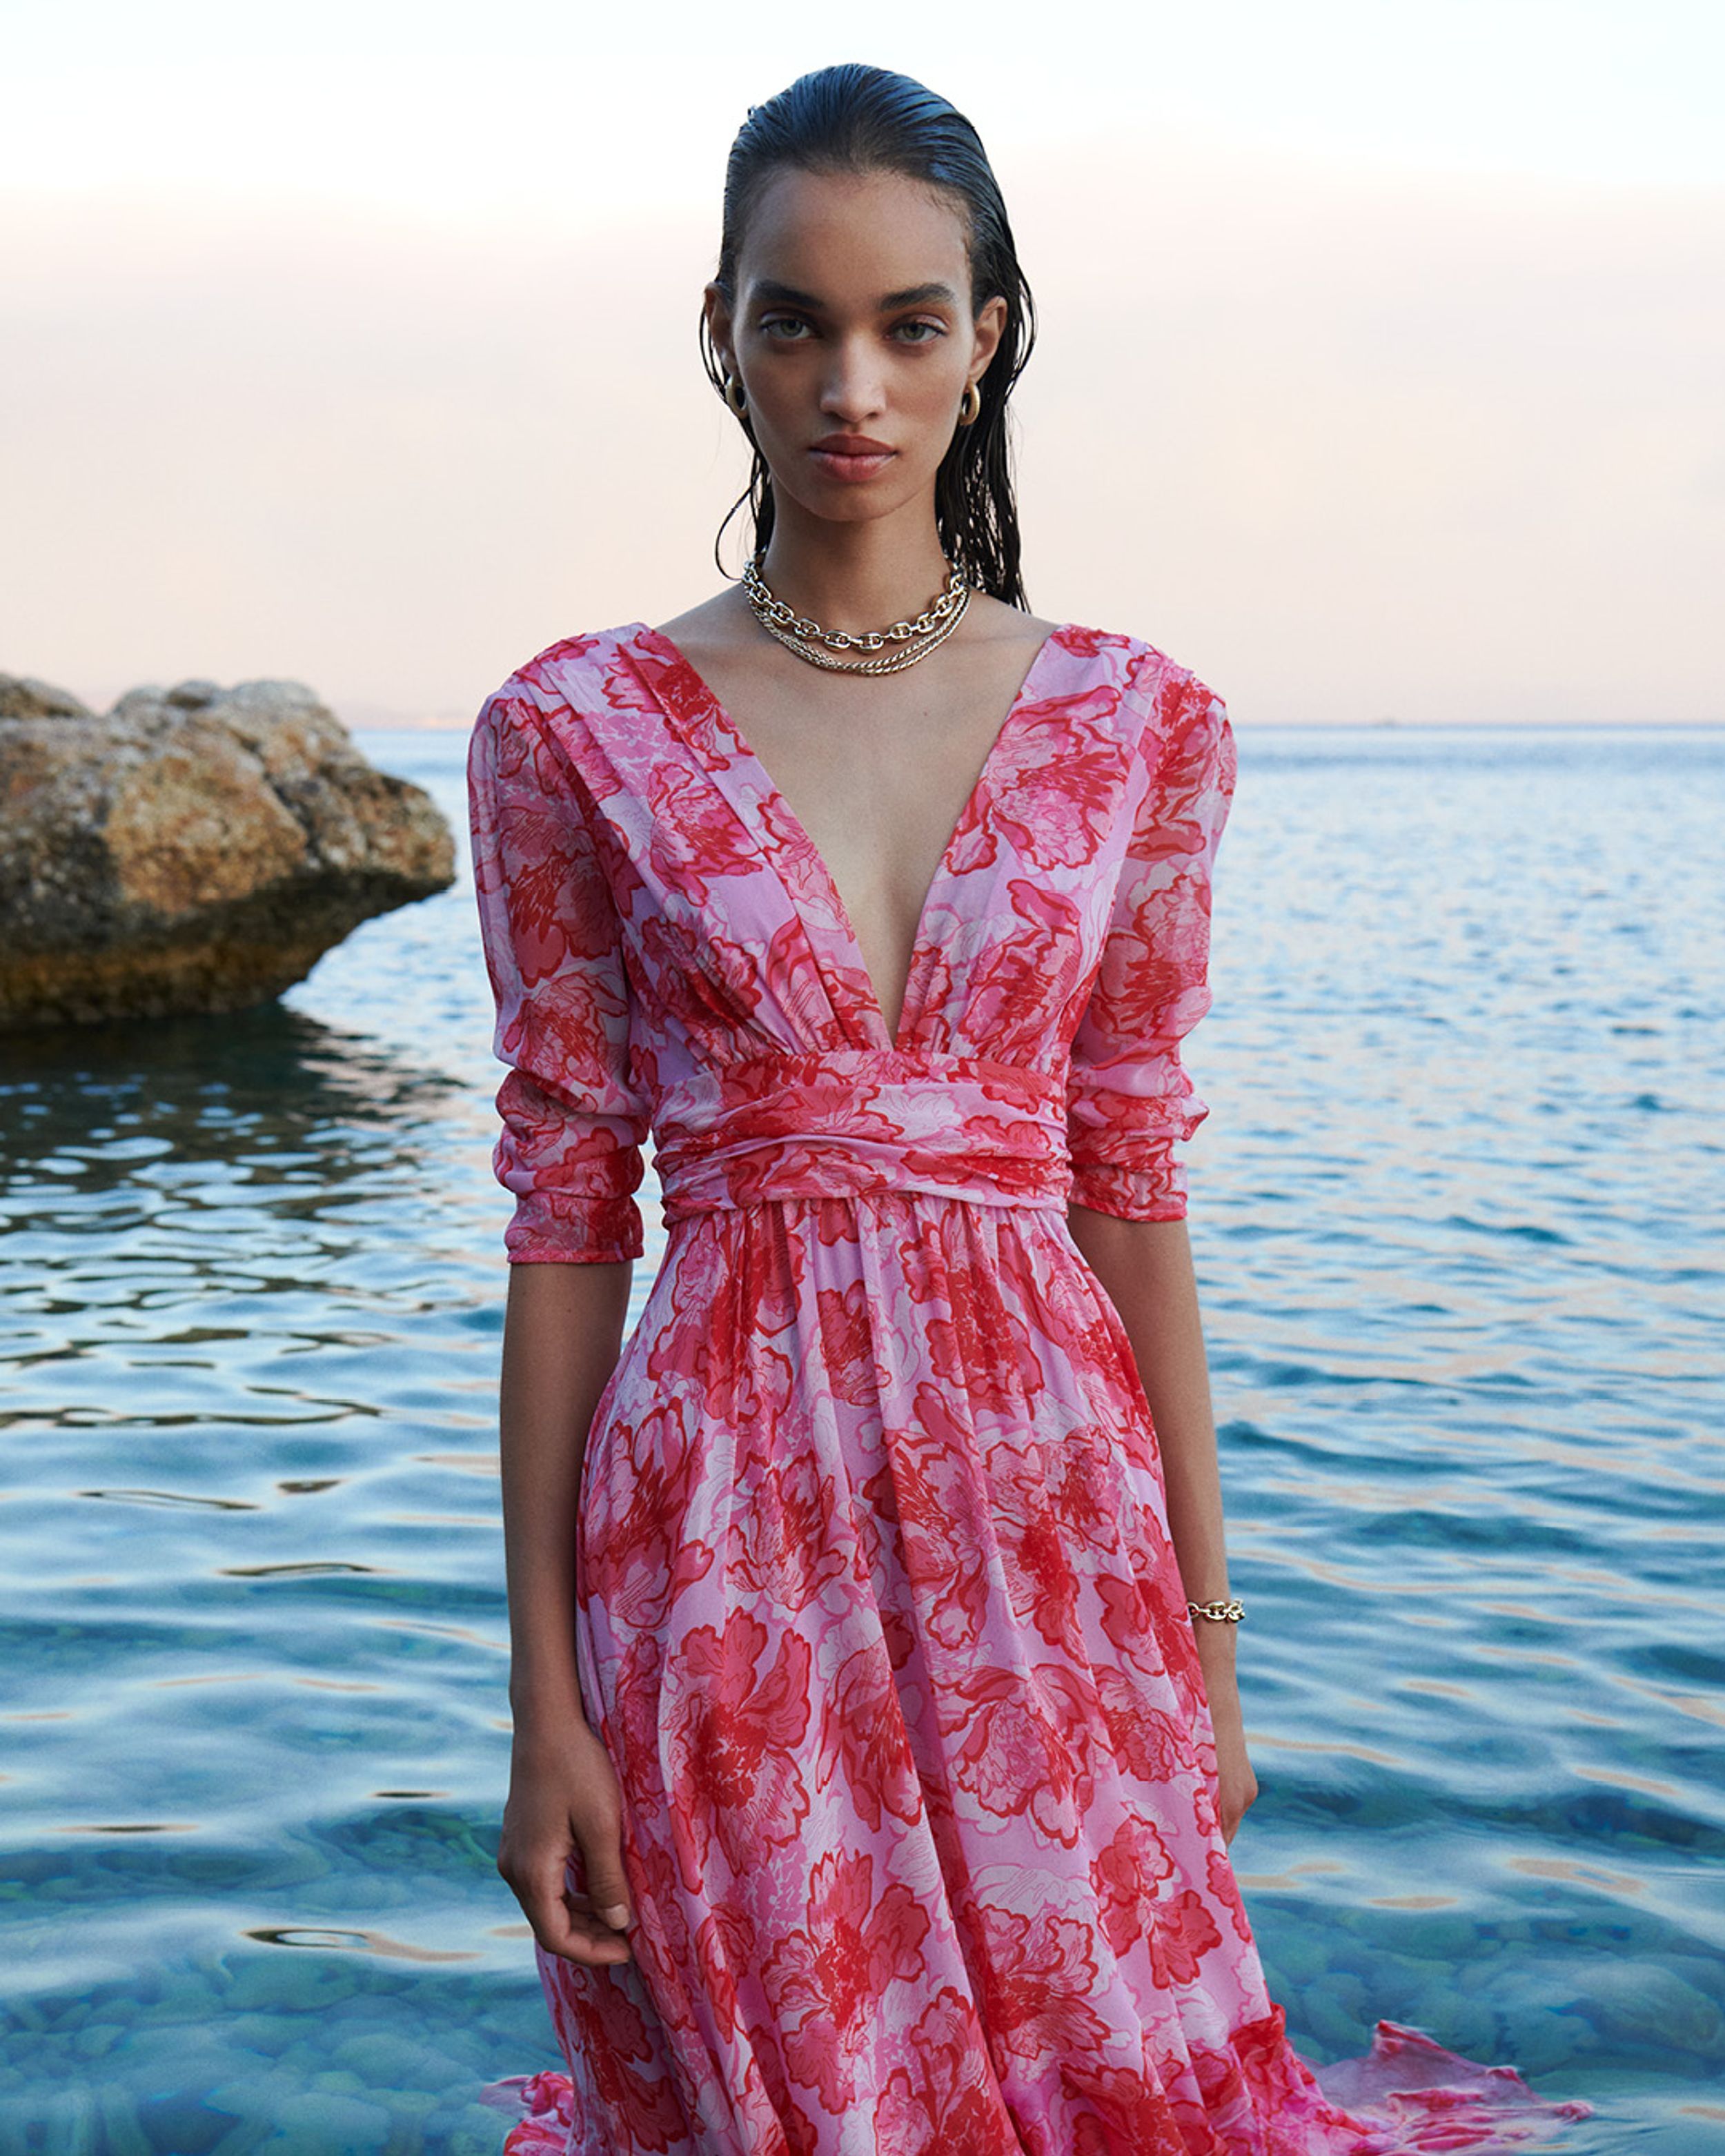 Model standing in the ocean at sunset wearing a pink floral print dress